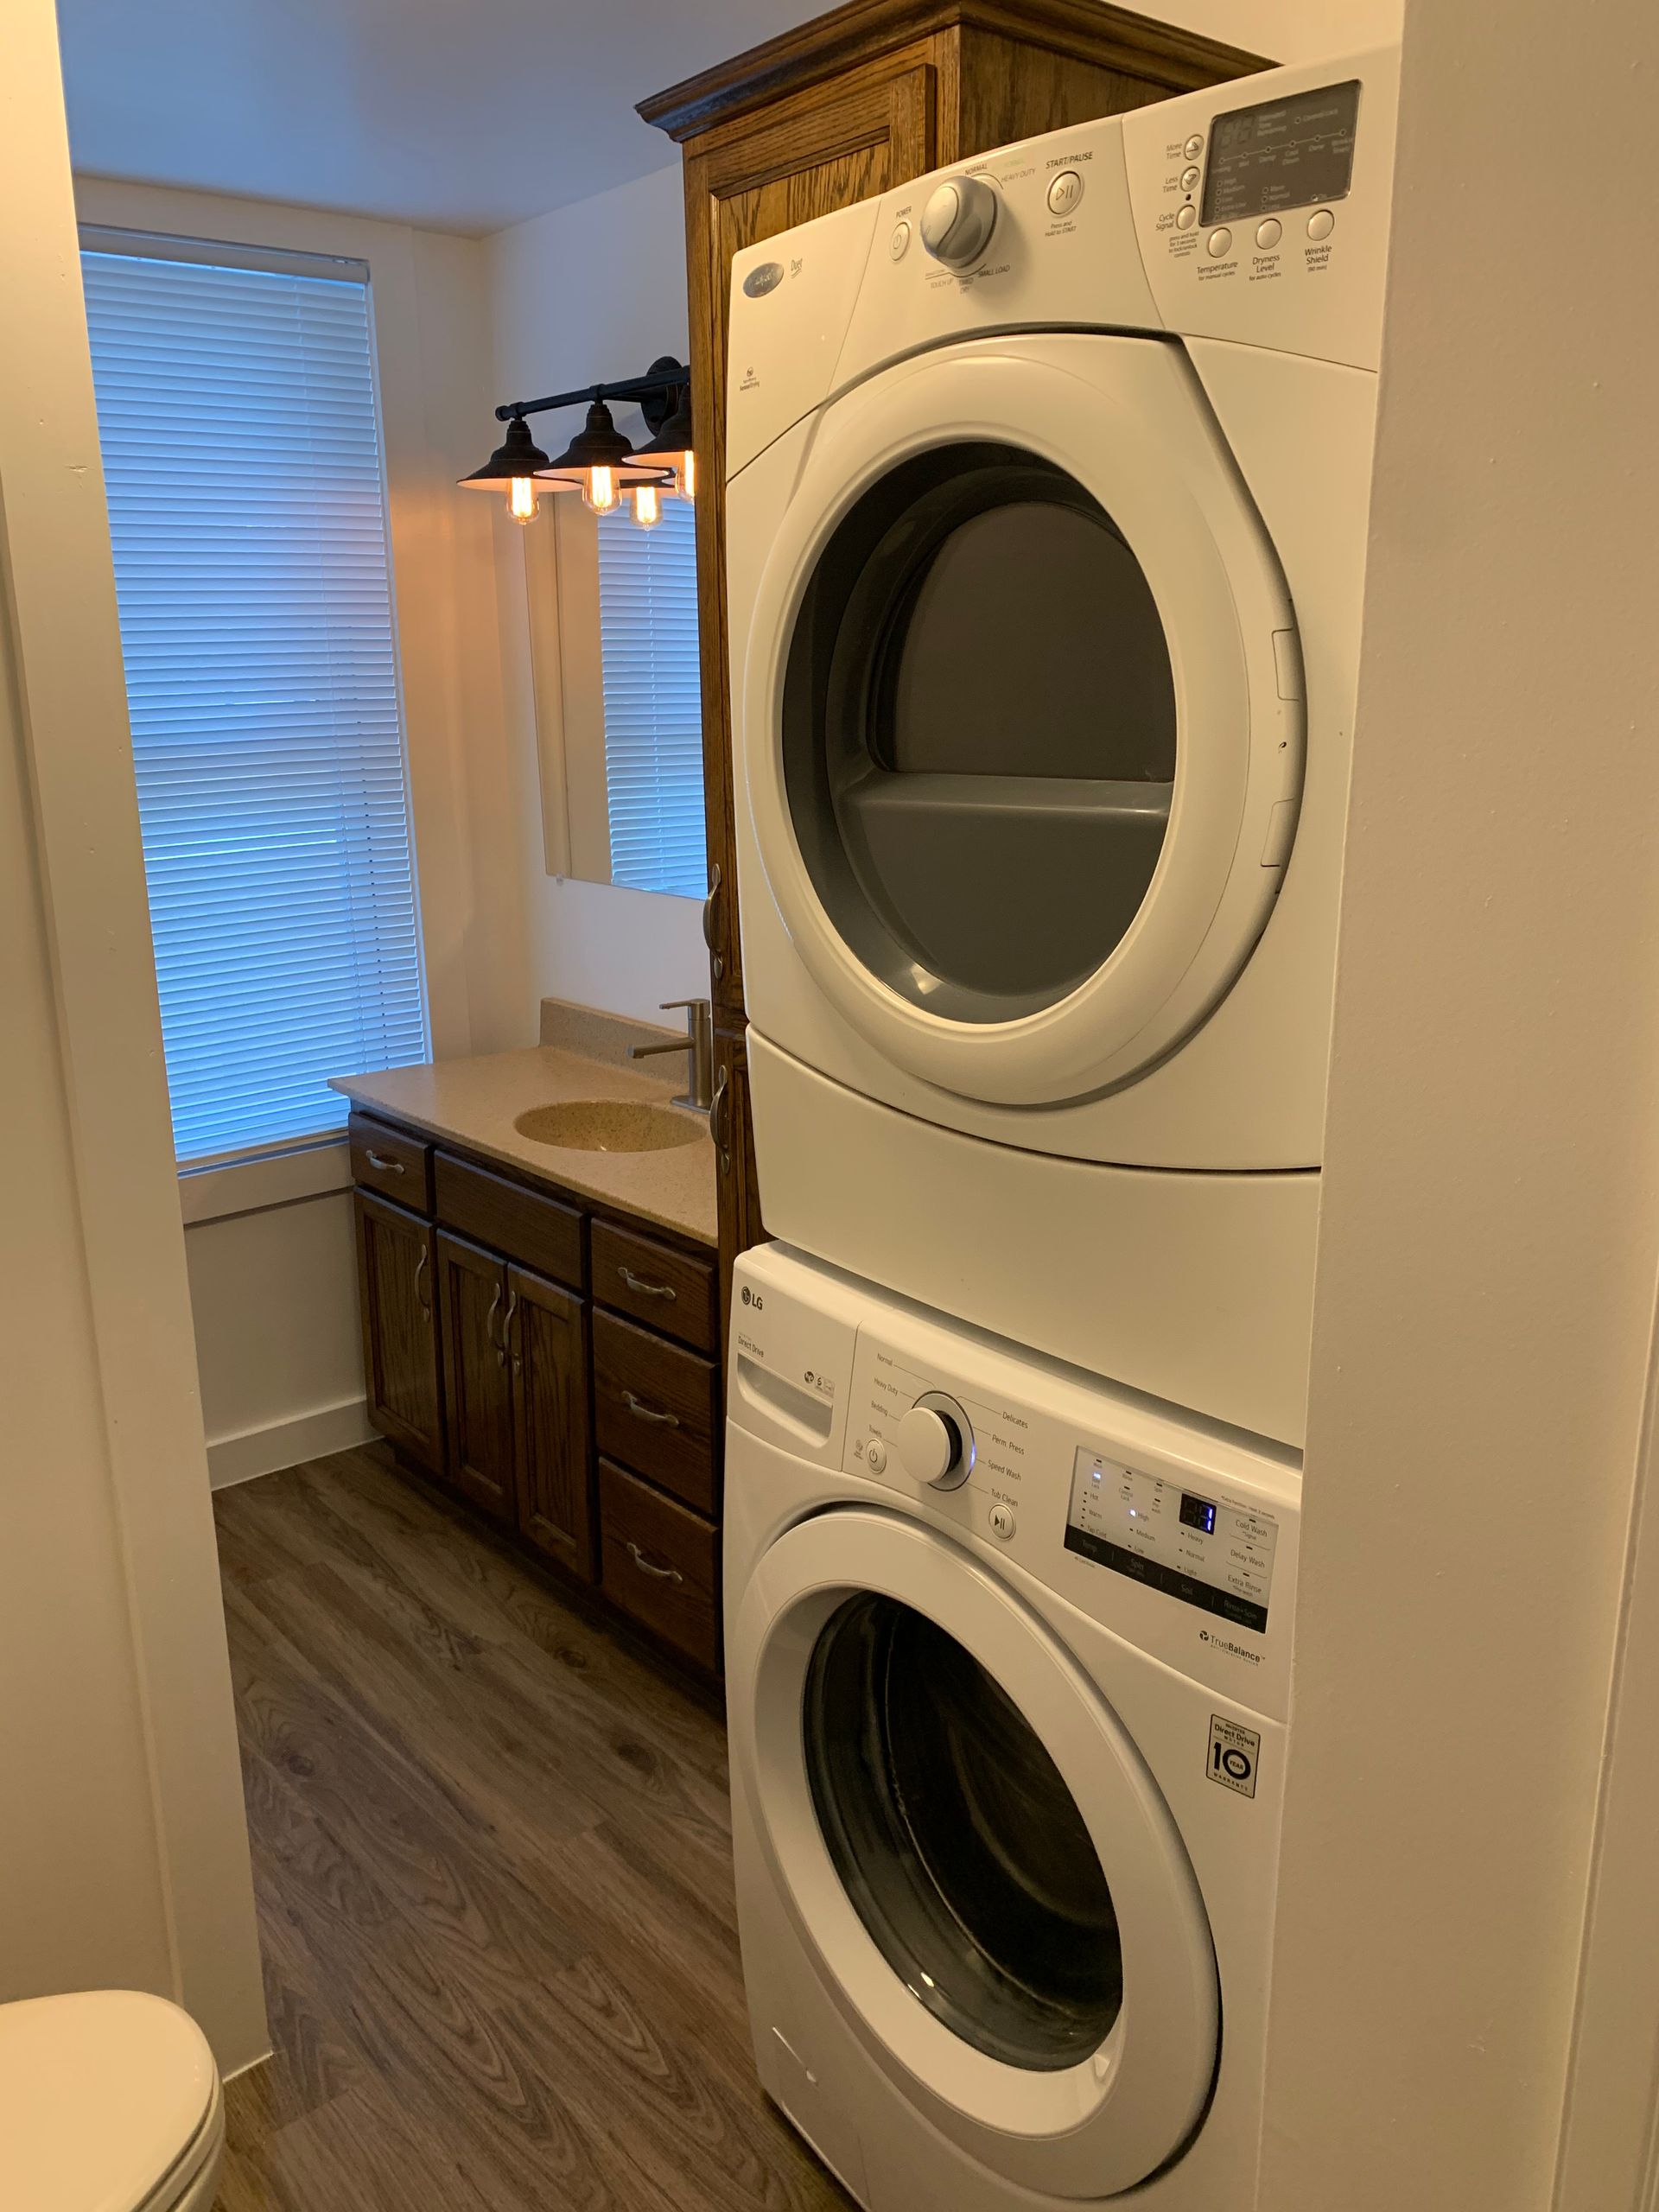 A bathroom with a washer and dryer stacked on top of each other.